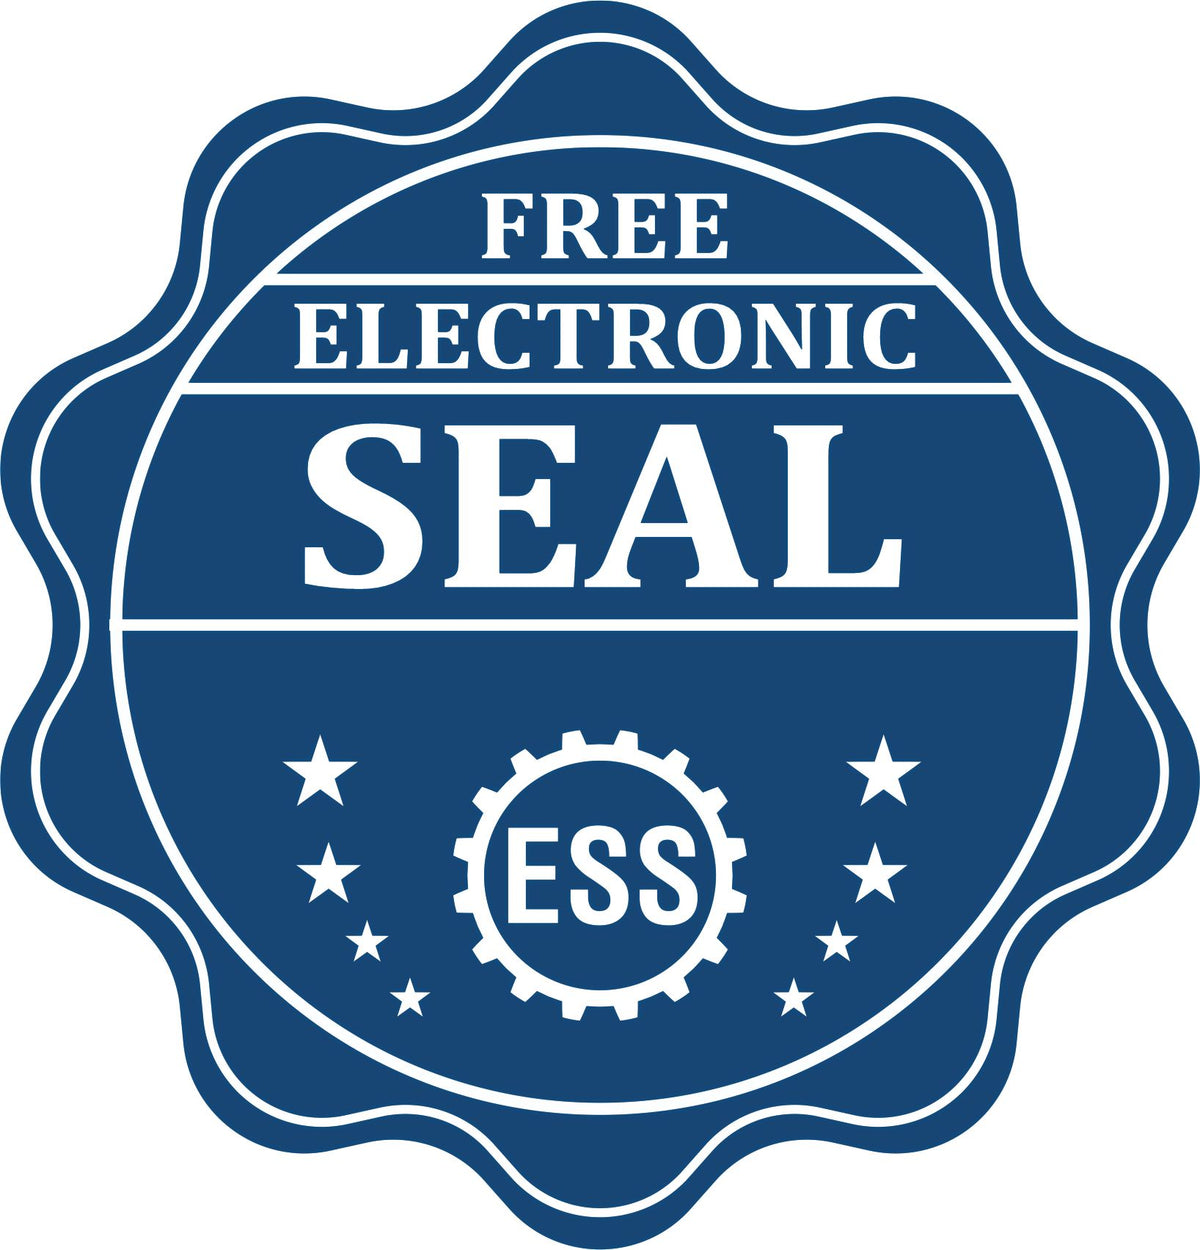 A badge showing a free electronic seal for the Handheld Illinois Architect Seal Embosser with stars and the ESS gear on the emblem.